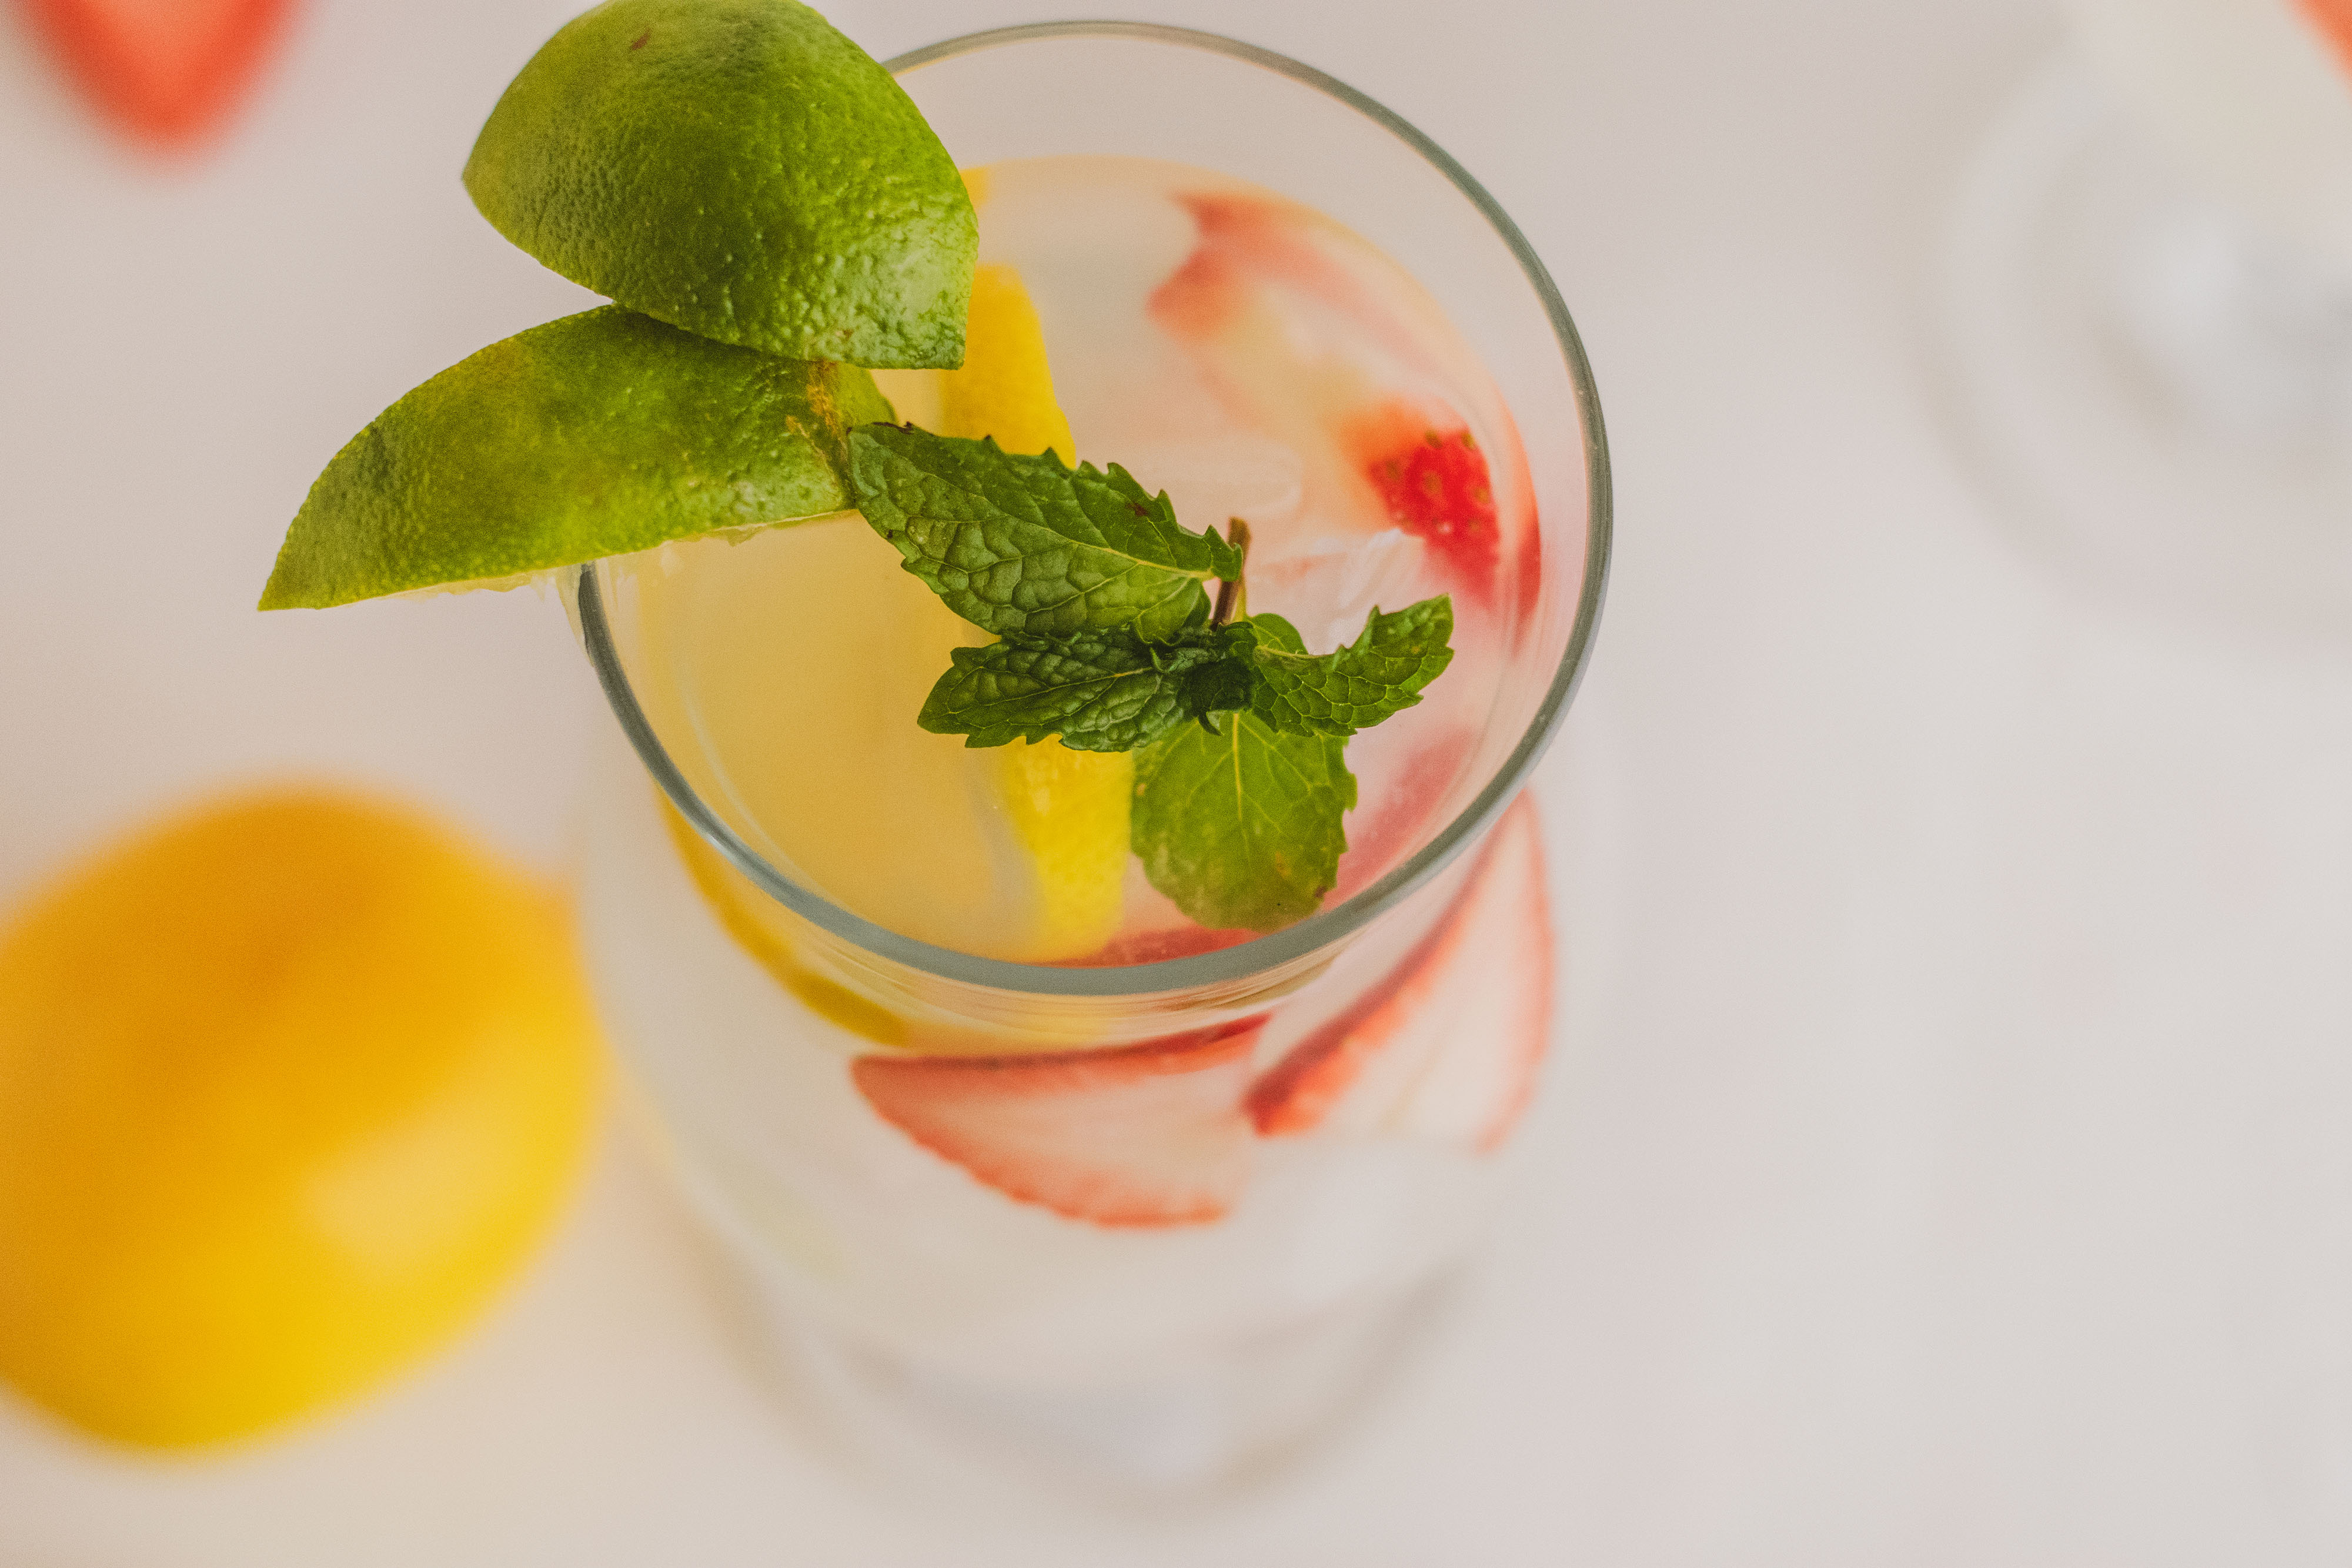 Two glasses with low carb strawberry lemonade mojito drink. With sliced strawberries and lemons and mint leaves on a white surface.